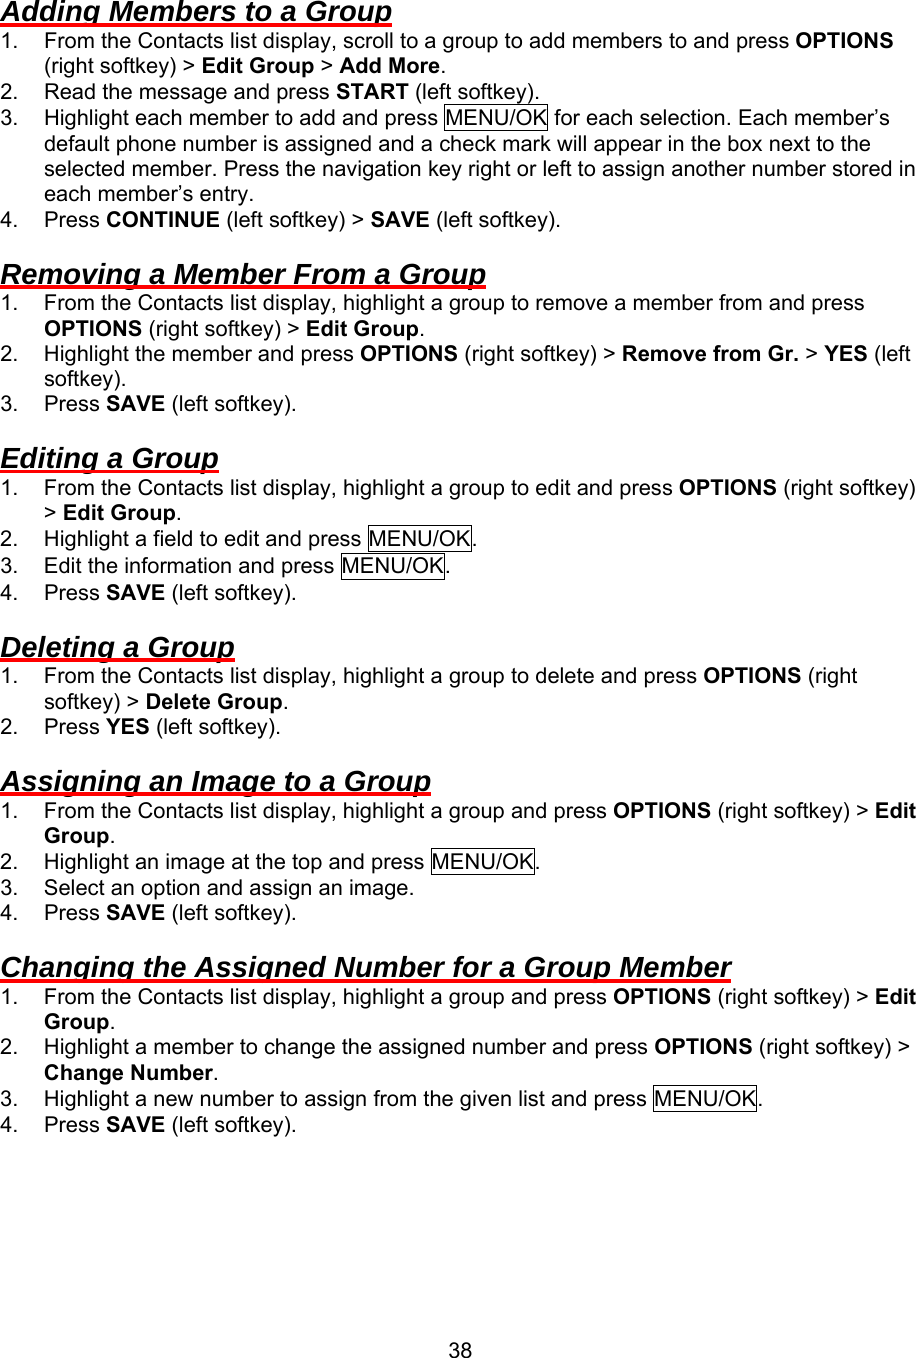  38Adding Members to a Group 1.  From the Contacts list display, scroll to a group to add members to and press OPTIONS (right softkey) &gt; Edit Group &gt; Add More. 2.  Read the message and press START (left softkey). 3.  Highlight each member to add and press MENU/OK for each selection. Each member’s default phone number is assigned and a check mark will appear in the box next to the selected member. Press the navigation key right or left to assign another number stored in each member’s entry. 4. Press CONTINUE (left softkey) &gt; SAVE (left softkey).  Removing a Member From a Group 1.  From the Contacts list display, highlight a group to remove a member from and press OPTIONS (right softkey) &gt; Edit Group. 2.  Highlight the member and press OPTIONS (right softkey) &gt; Remove from Gr. &gt; YES (left softkey). 3. Press SAVE (left softkey).  Editing a Group 1.  From the Contacts list display, highlight a group to edit and press OPTIONS (right softkey) &gt; Edit Group. 2.  Highlight a field to edit and press MENU/OK. 3.  Edit the information and press MENU/OK. 4. Press SAVE (left softkey).  Deleting a Group 1.  From the Contacts list display, highlight a group to delete and press OPTIONS (right softkey) &gt; Delete Group. 2. Press YES (left softkey).  Assigning an Image to a Group 1.  From the Contacts list display, highlight a group and press OPTIONS (right softkey) &gt; Edit Group. 2.  Highlight an image at the top and press MENU/OK. 3.  Select an option and assign an image. 4. Press SAVE (left softkey).  Changing the Assigned Number for a Group Member 1.  From the Contacts list display, highlight a group and press OPTIONS (right softkey) &gt; Edit Group. 2.  Highlight a member to change the assigned number and press OPTIONS (right softkey) &gt; Change Number. 3.  Highlight a new number to assign from the given list and press MENU/OK. 4. Press SAVE (left softkey).  